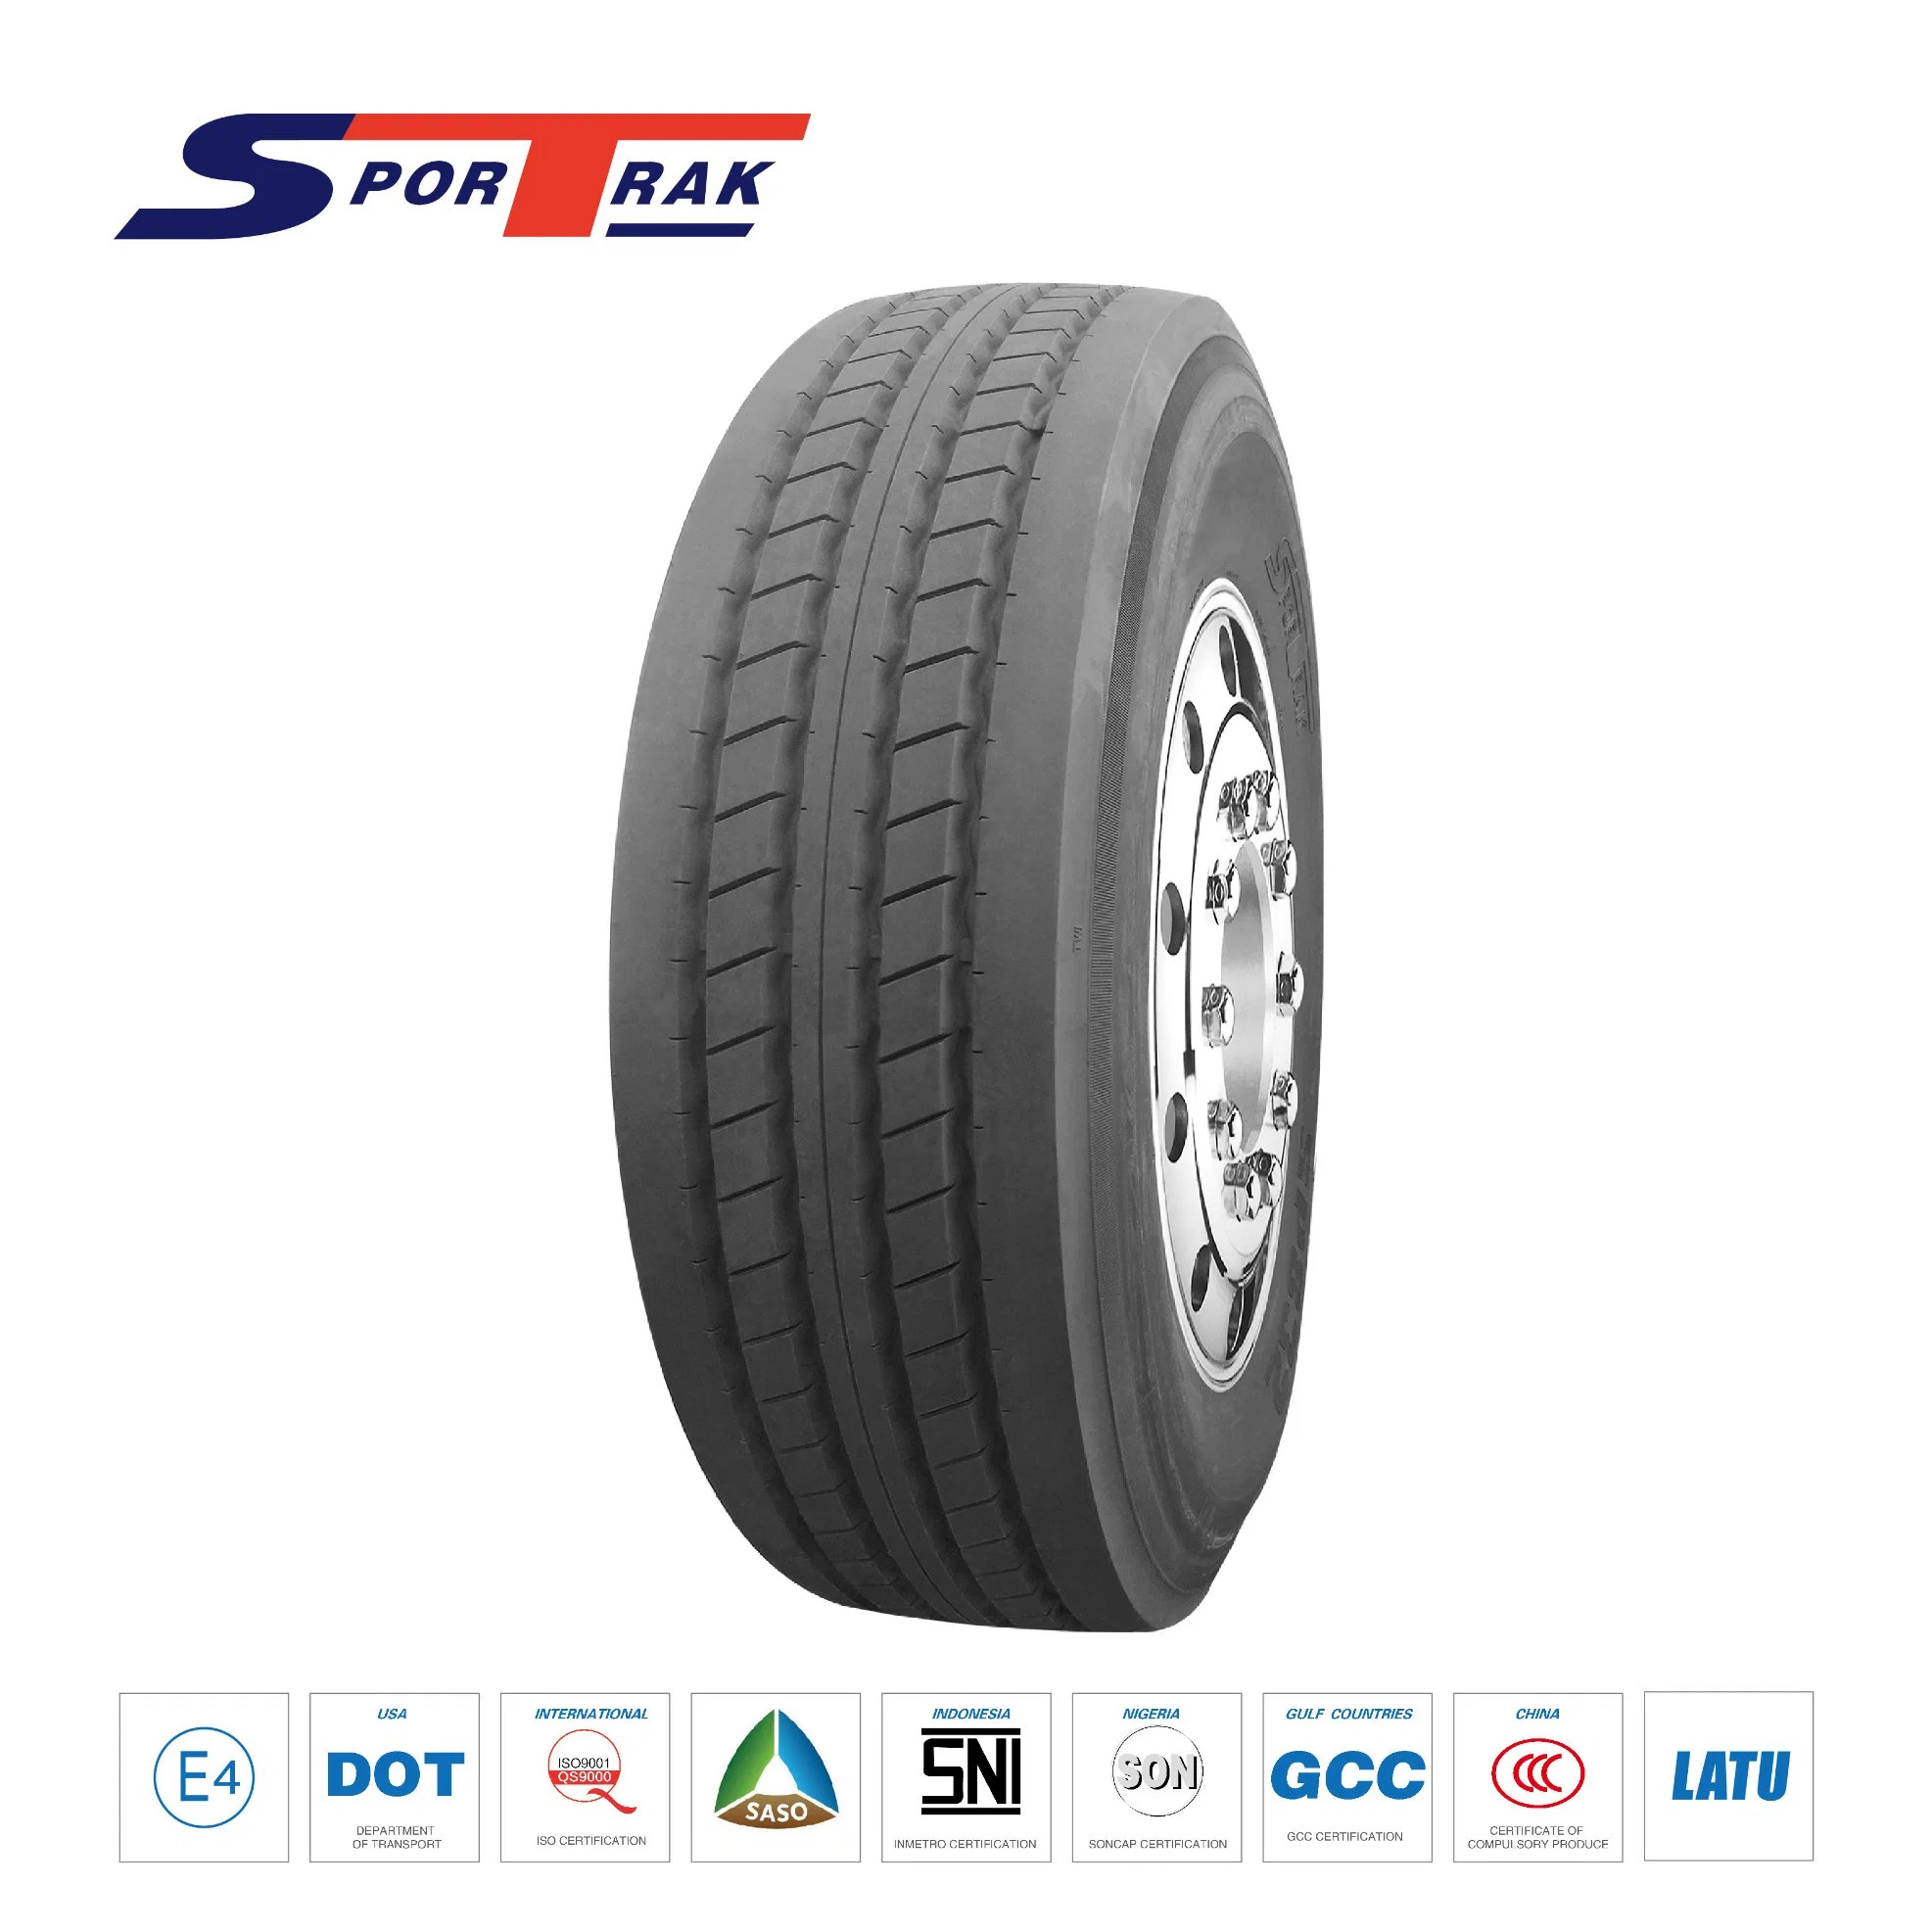 China Top Tire Brands Factory Highway Tubeless Tyres 11r22.5 Trailer Drive Steer Tyre Radial Heavy Duty TBR 1200r20 Truck Bus Tire Manufacturer 315/80r22.5